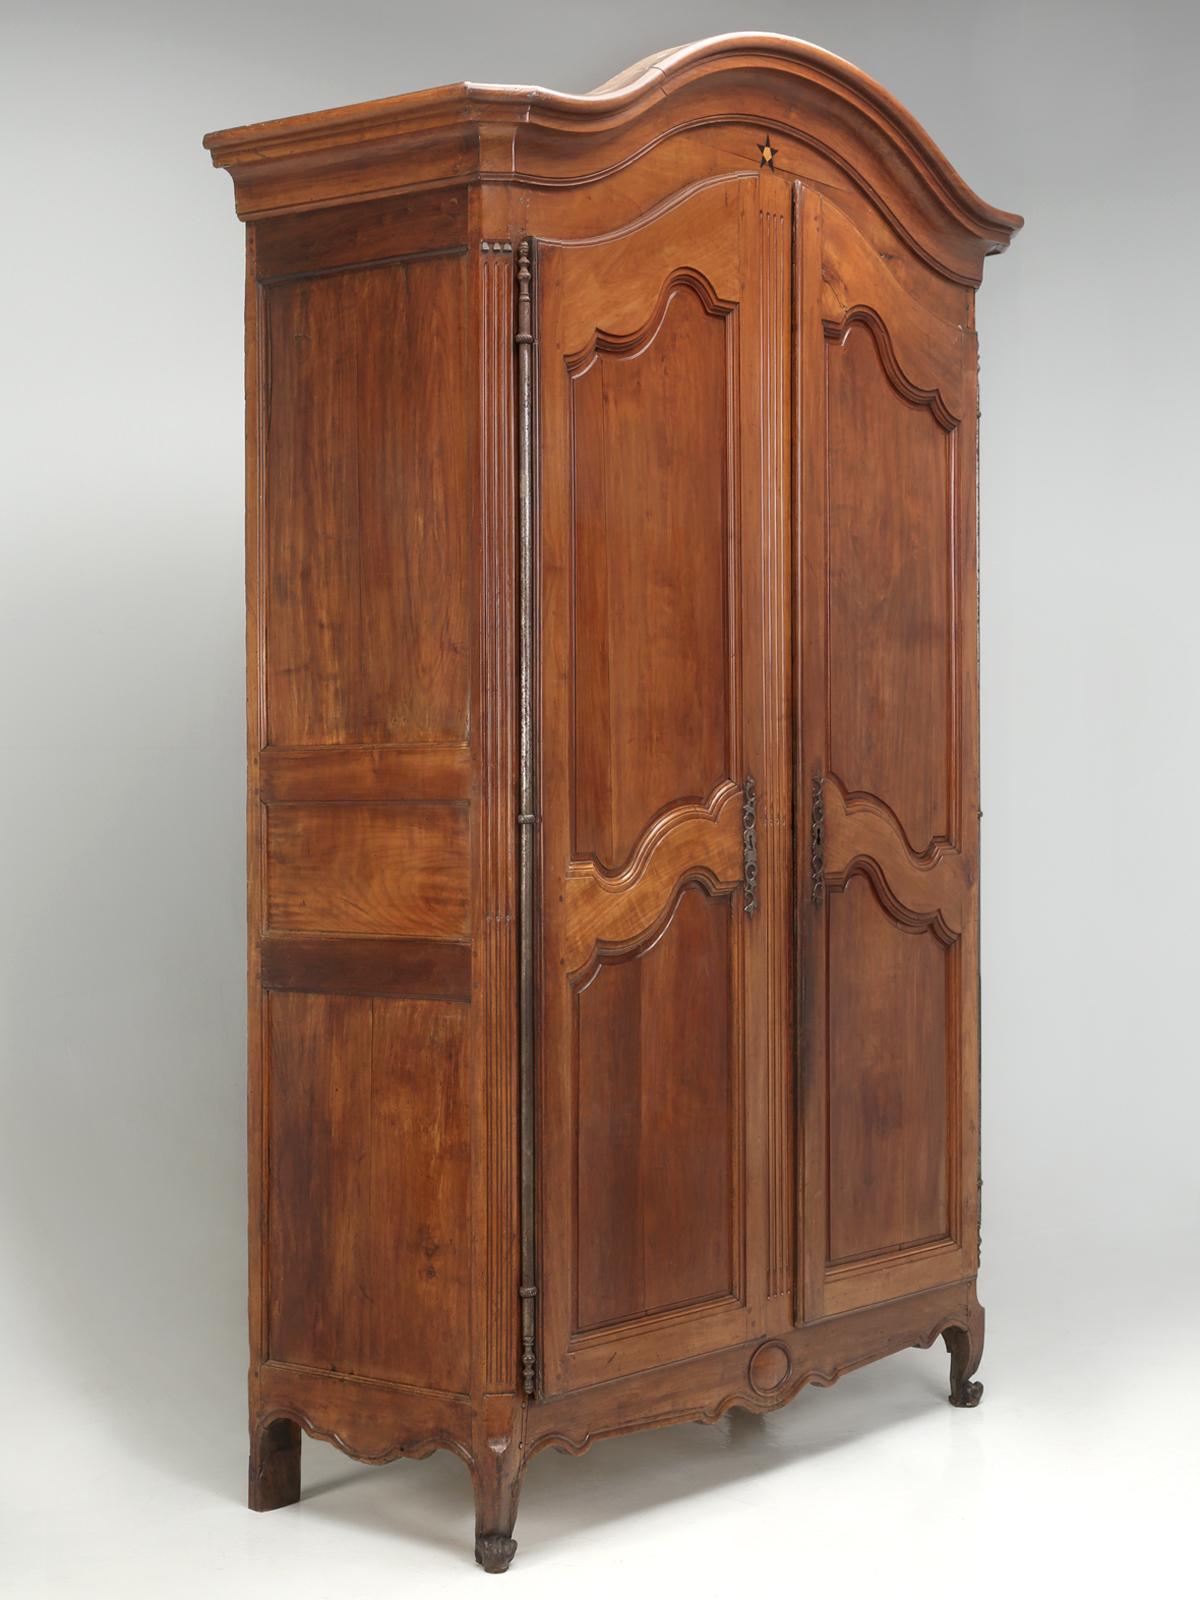 Hand-Crafted Antique French Cherry Louis Style XV Armoire in it's Original Finish circa 1800 